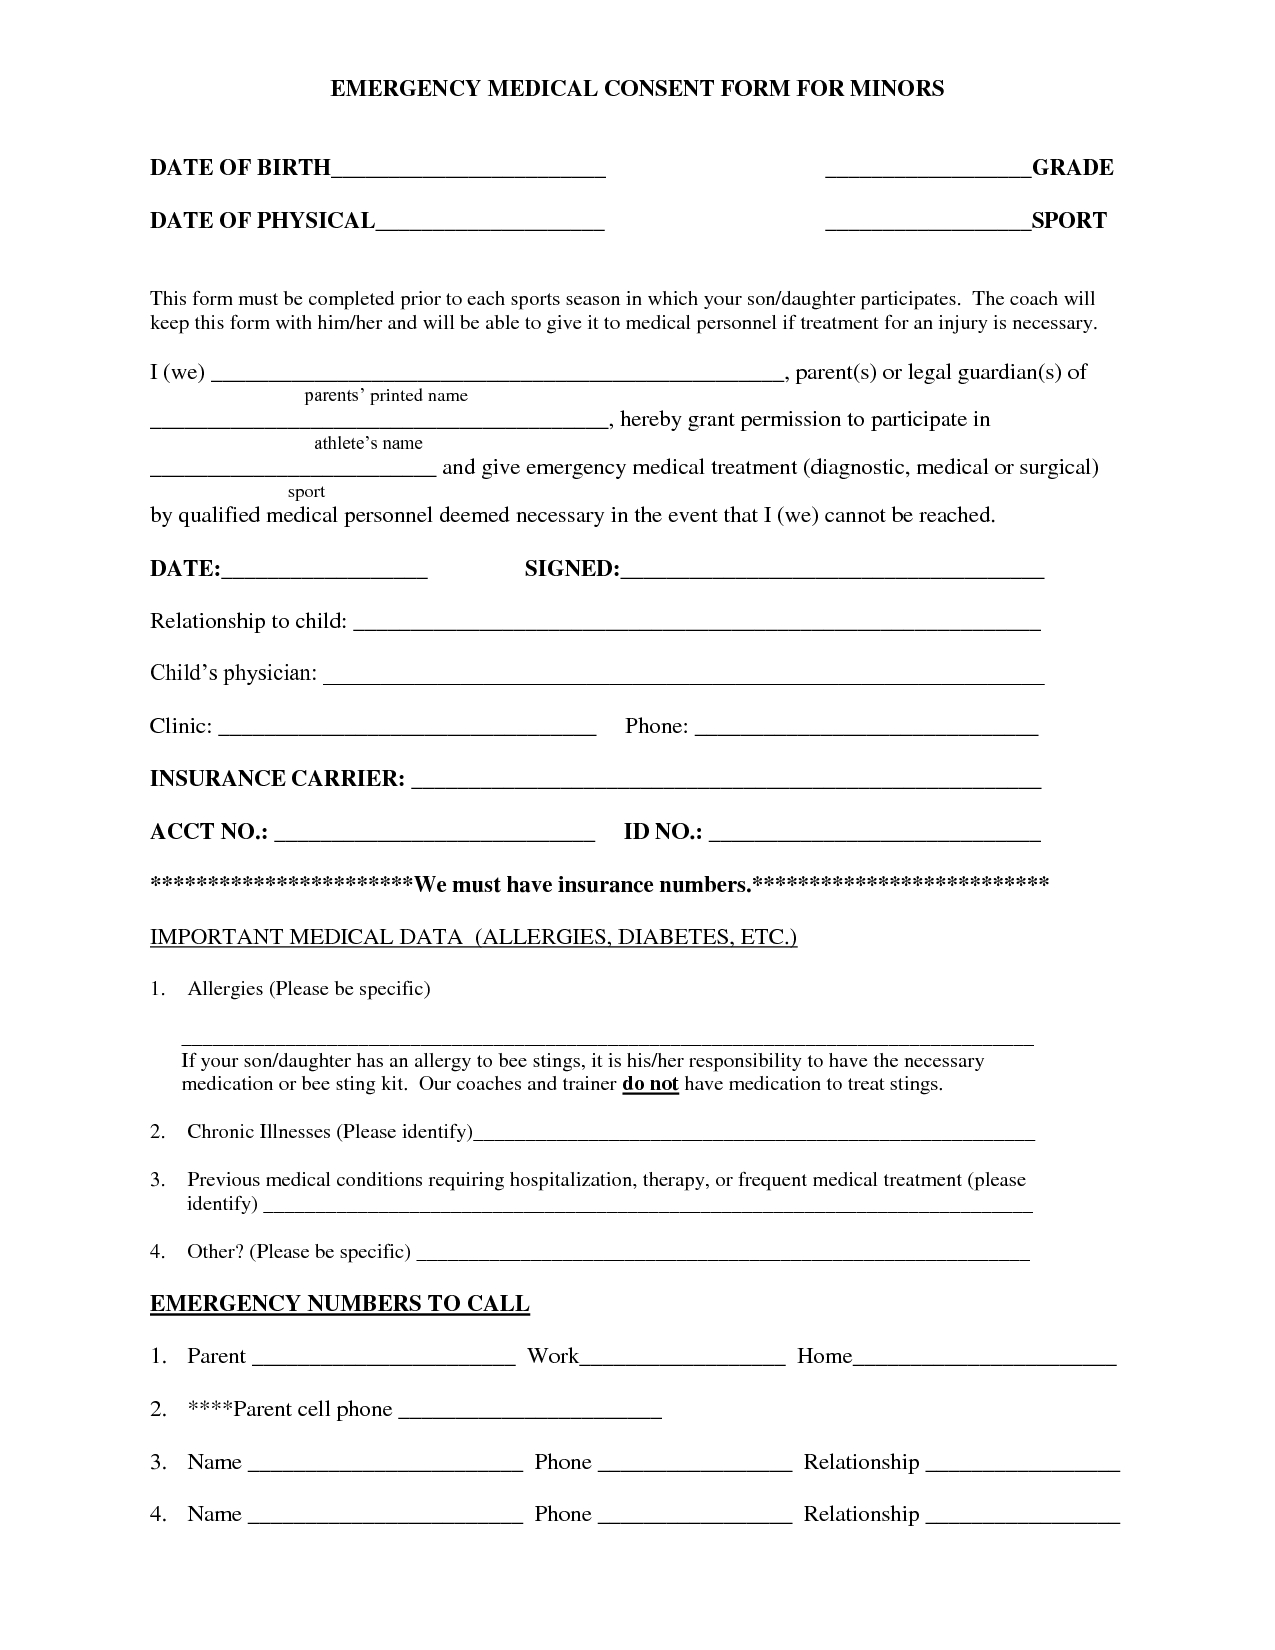 Medical Authorization Form For Children Images - Medical - Free Printable Child Medical Consent Form